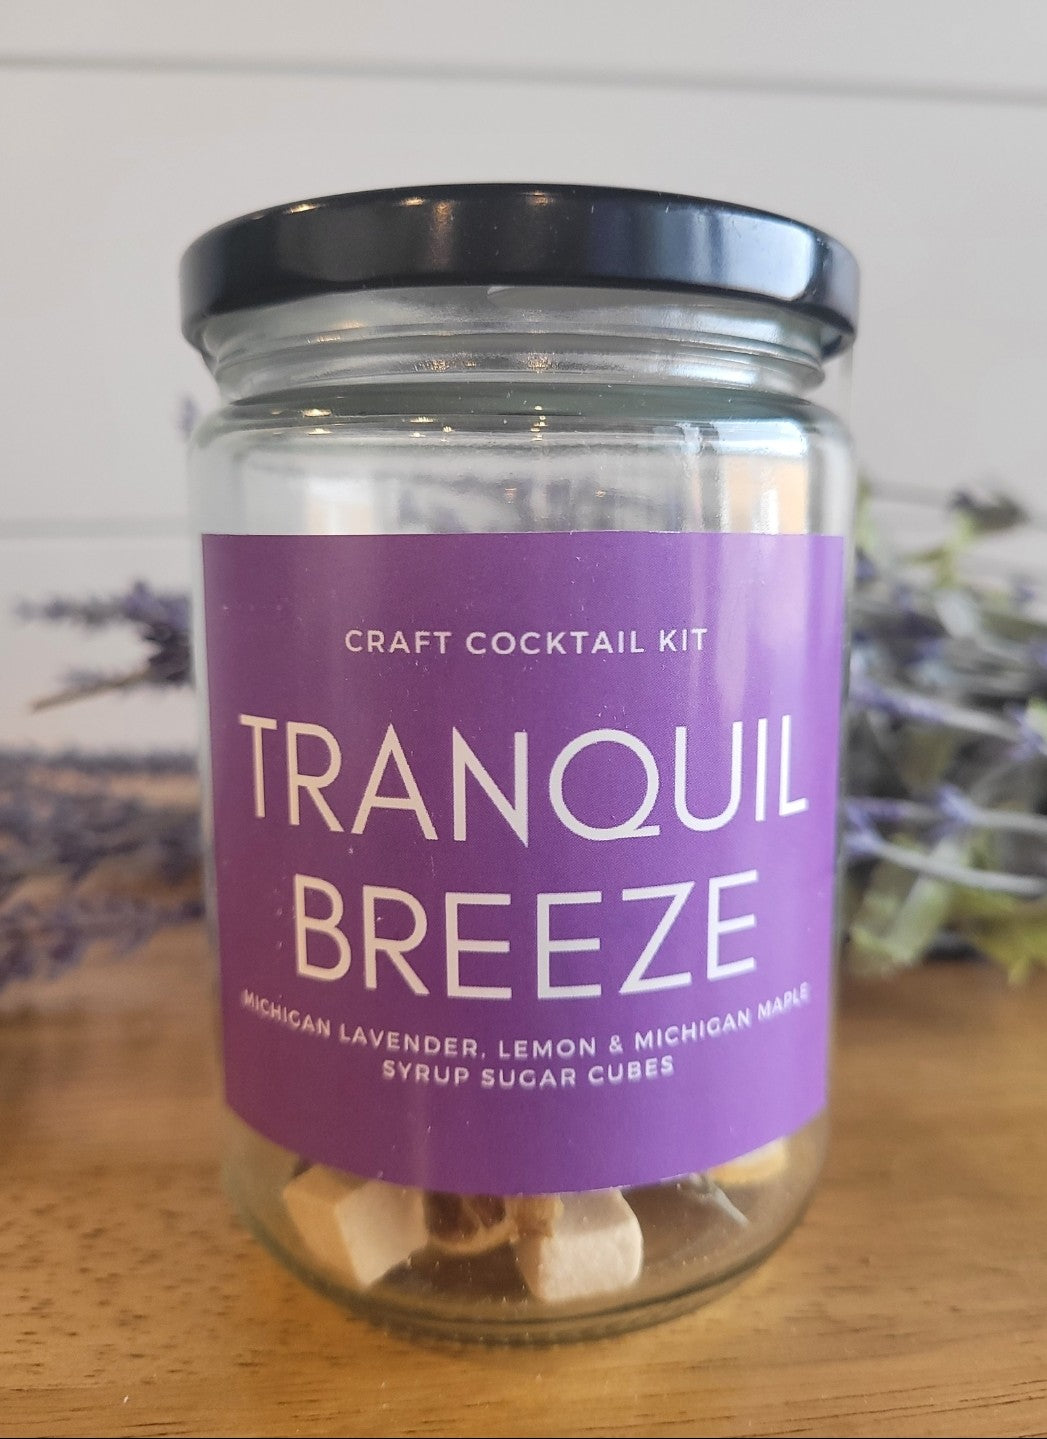 Tranquil Breeze Craft Cocktail Kit